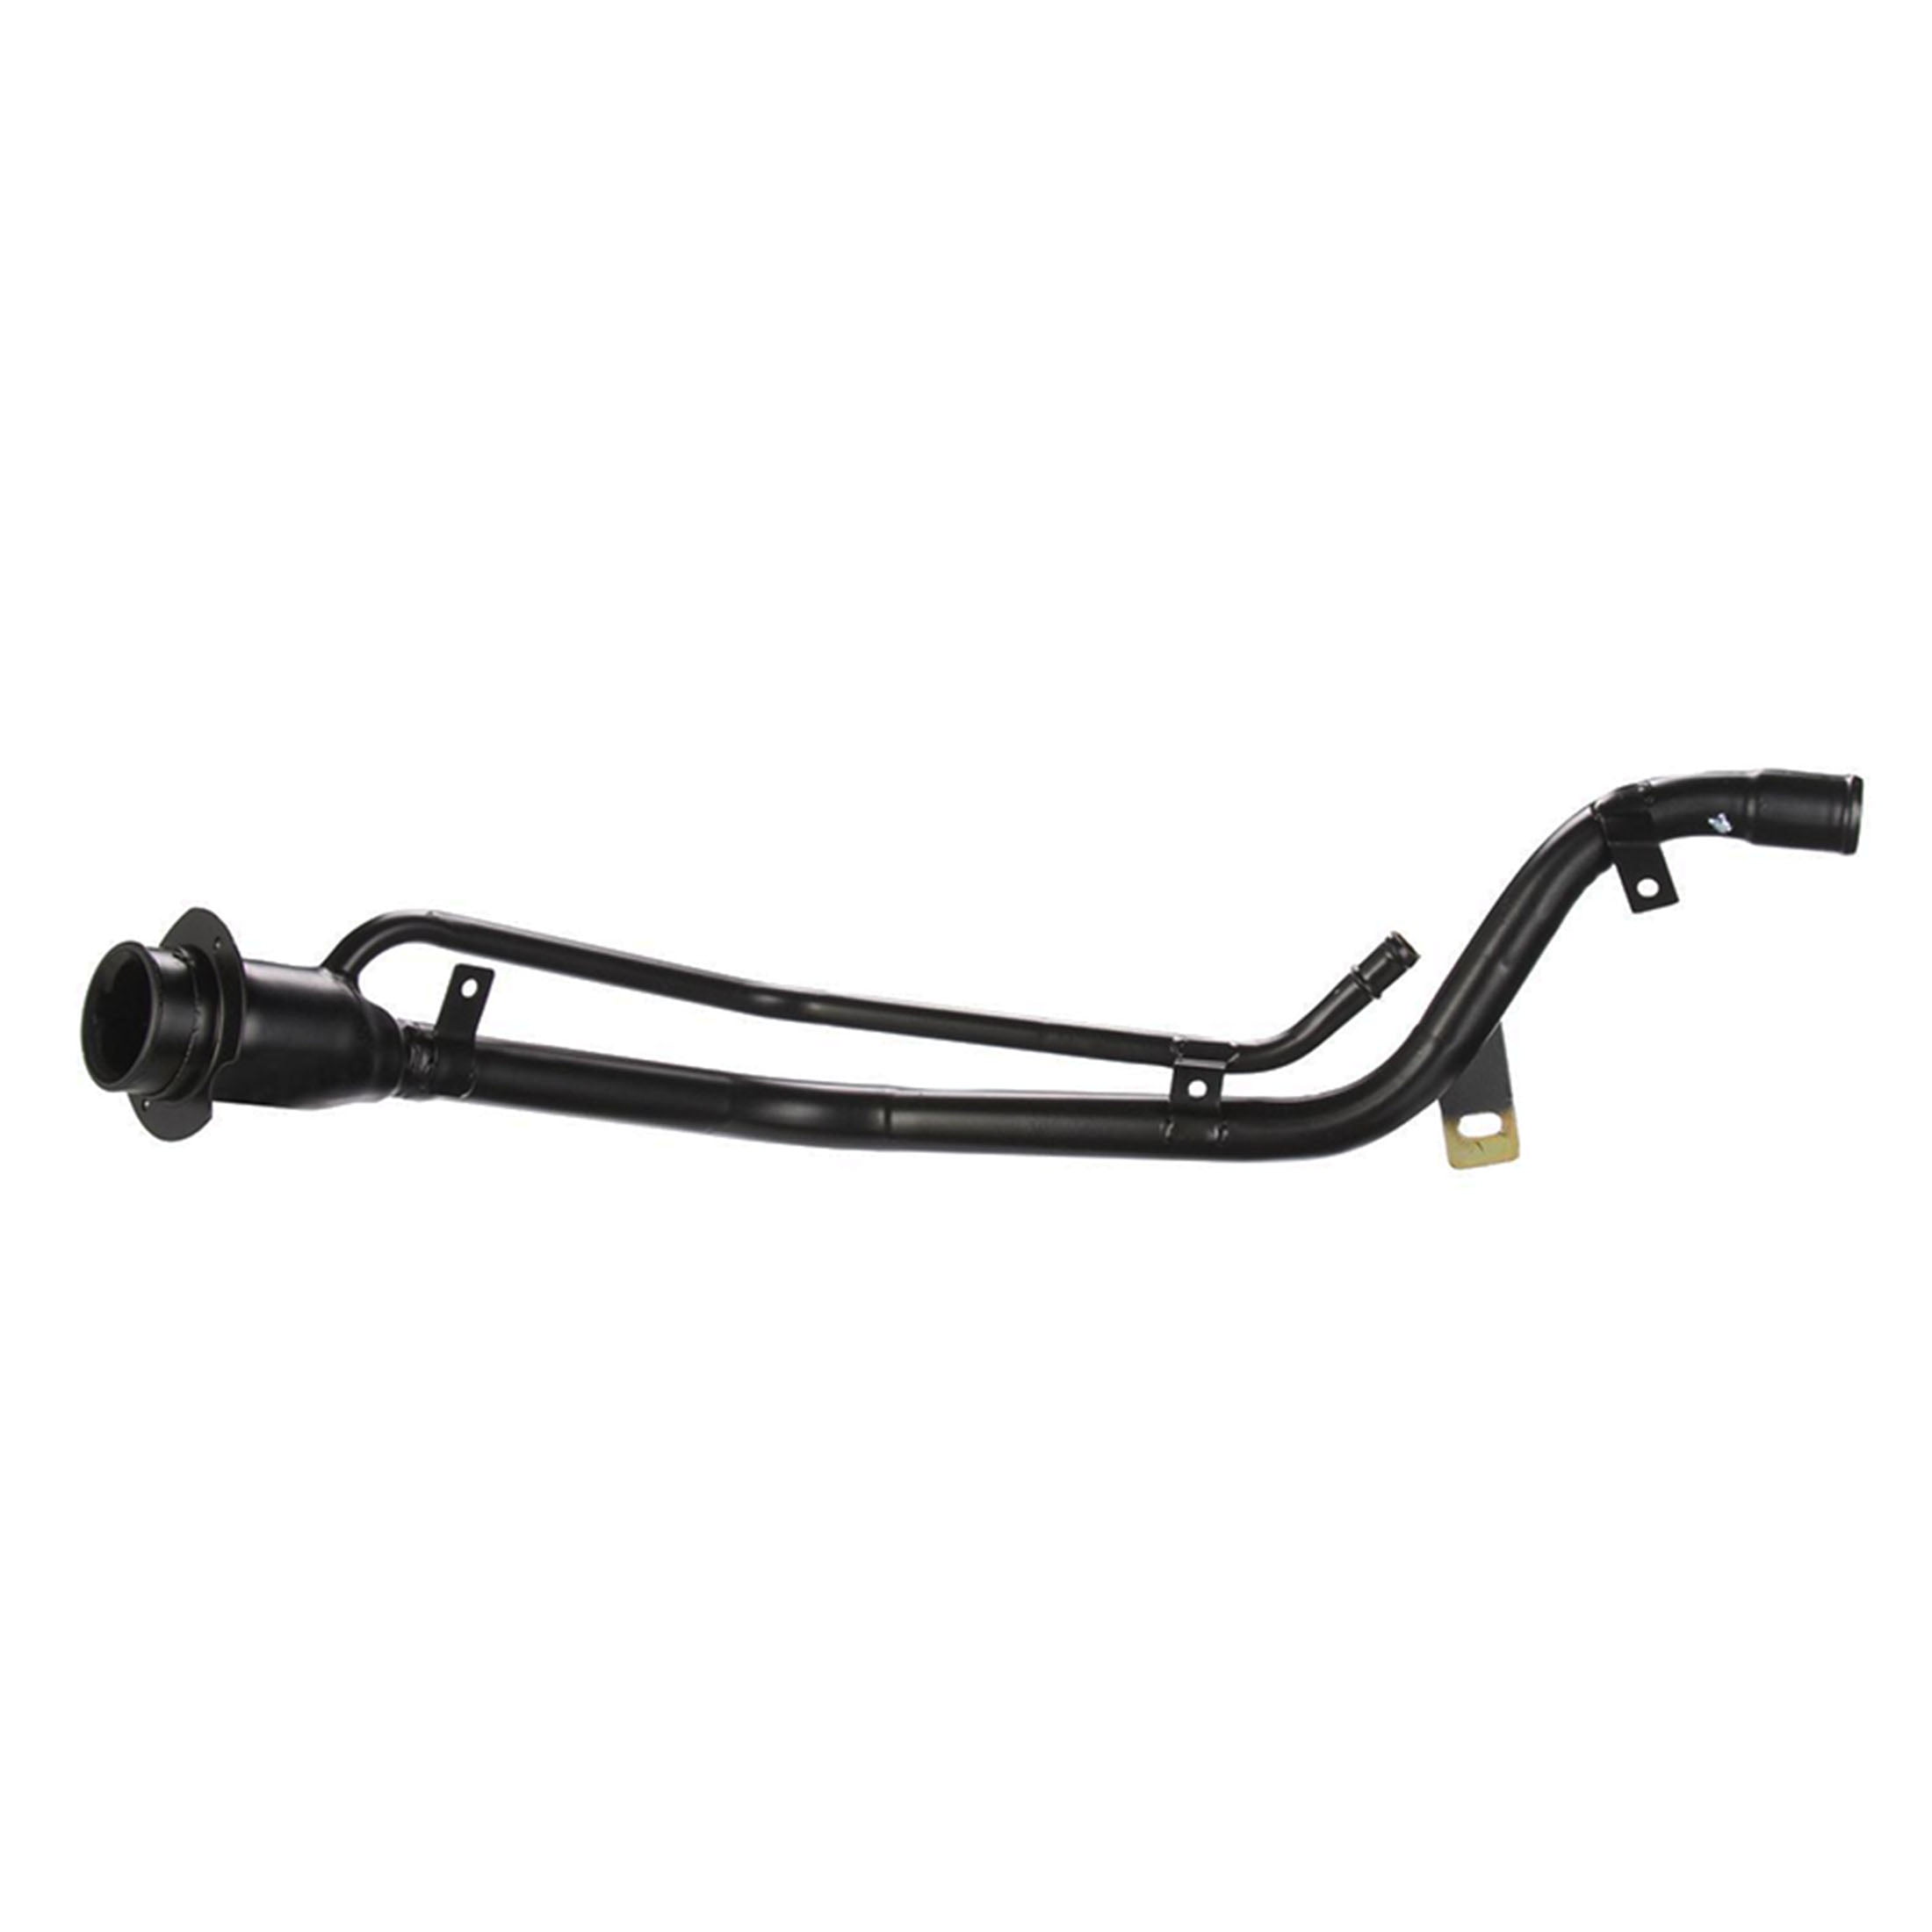 Agility Auto Parts 4063171 Fuel Tank Filler Neck for Mazda Specific Models  